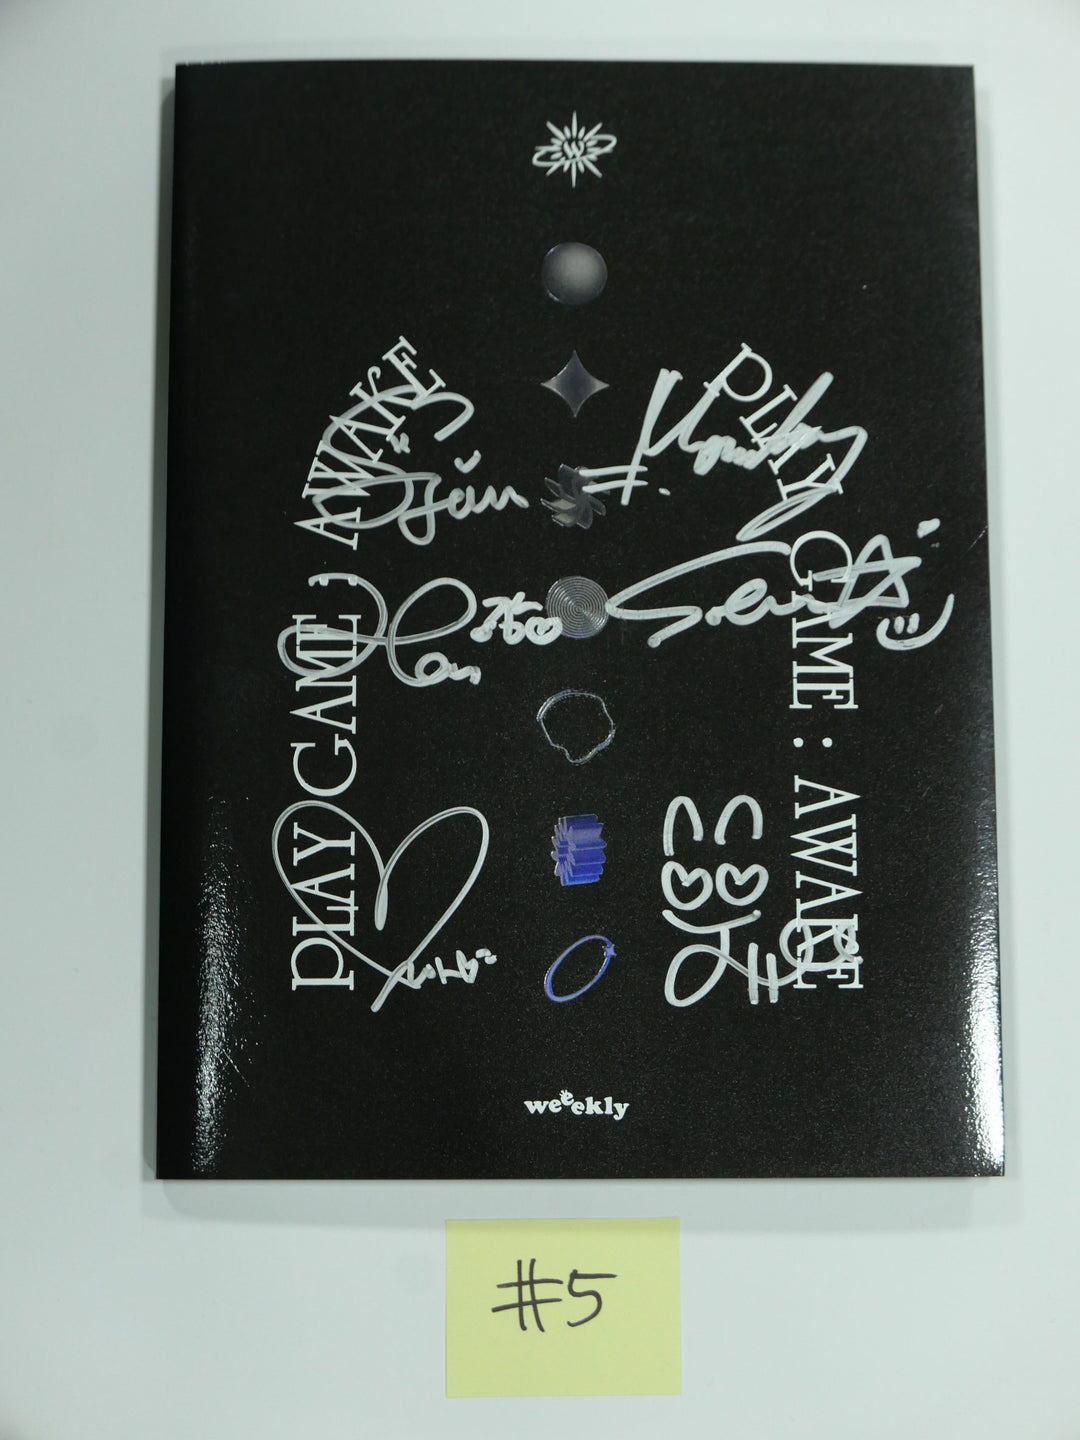 Weeekly "Play Game : AWAKE" - Hand Autographed(Signed) Promo Album